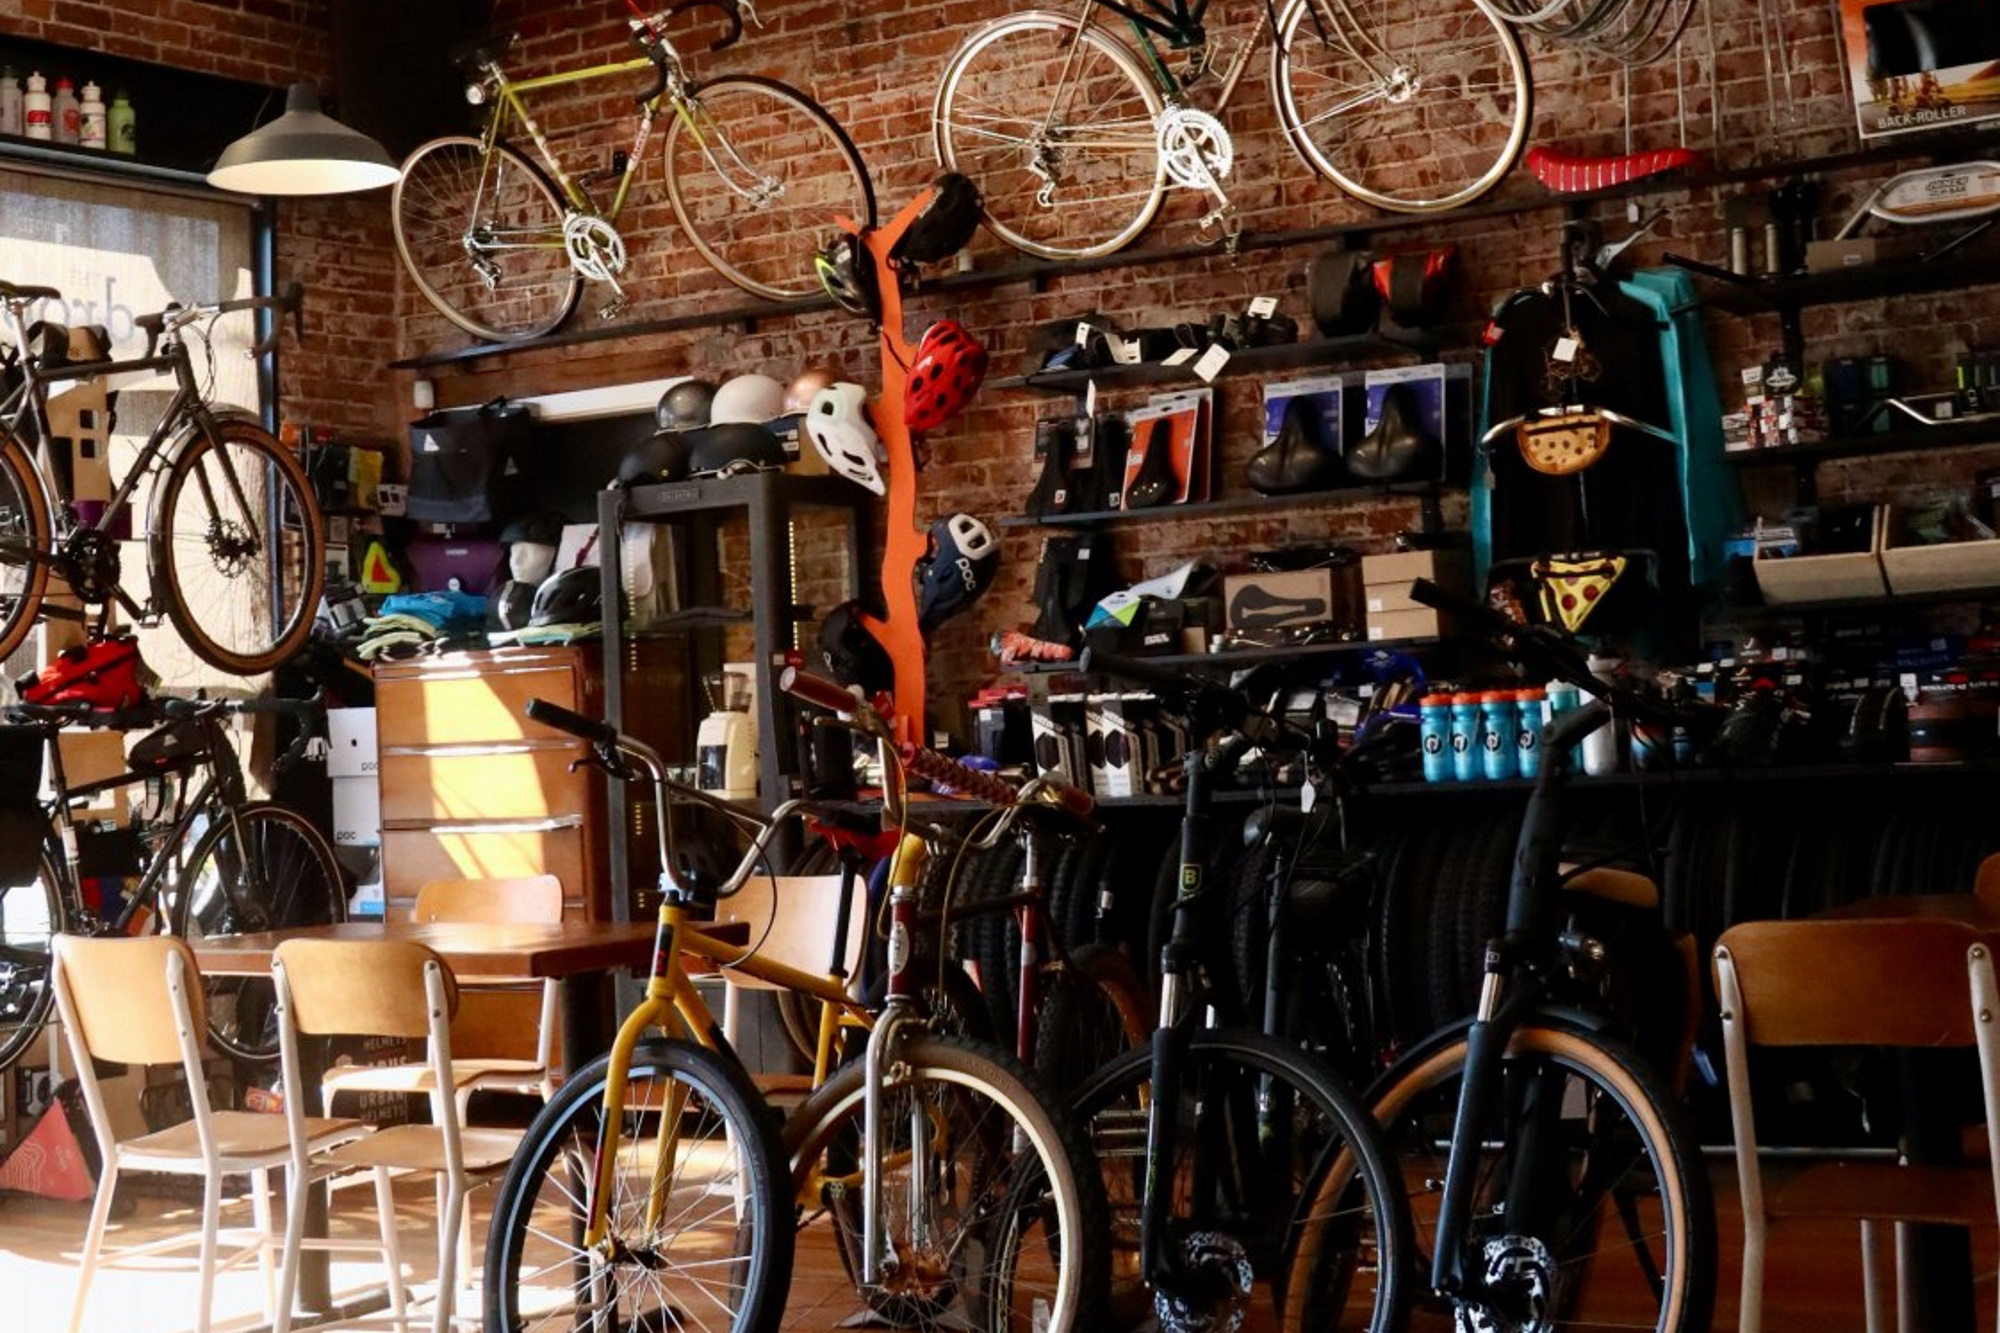 A bicycle shop filled with bikes.